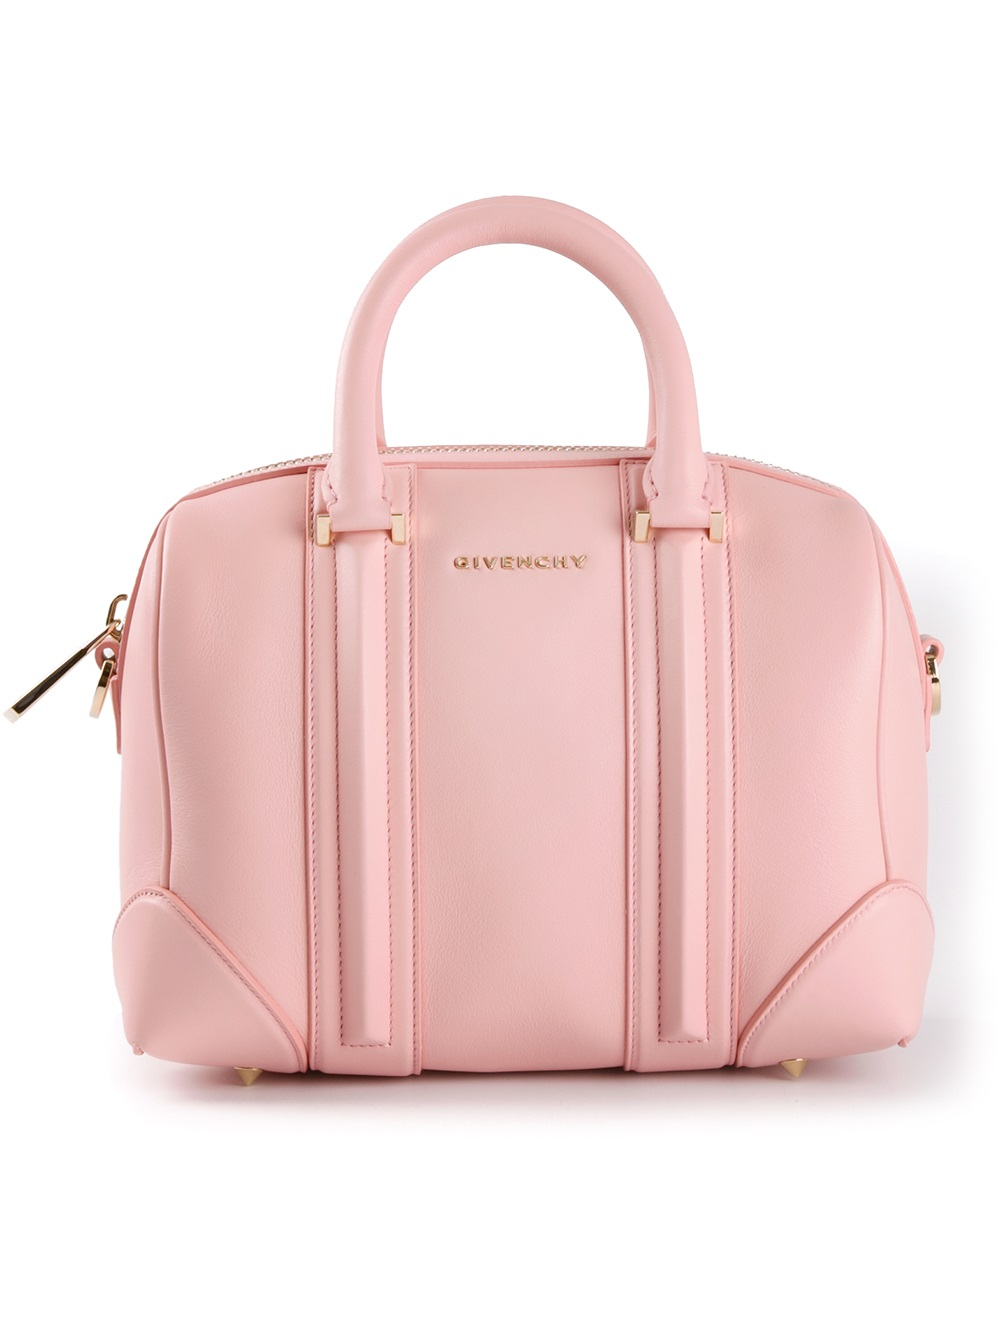 Lyst - Givenchy Lucrezia Medium Tote in Pink